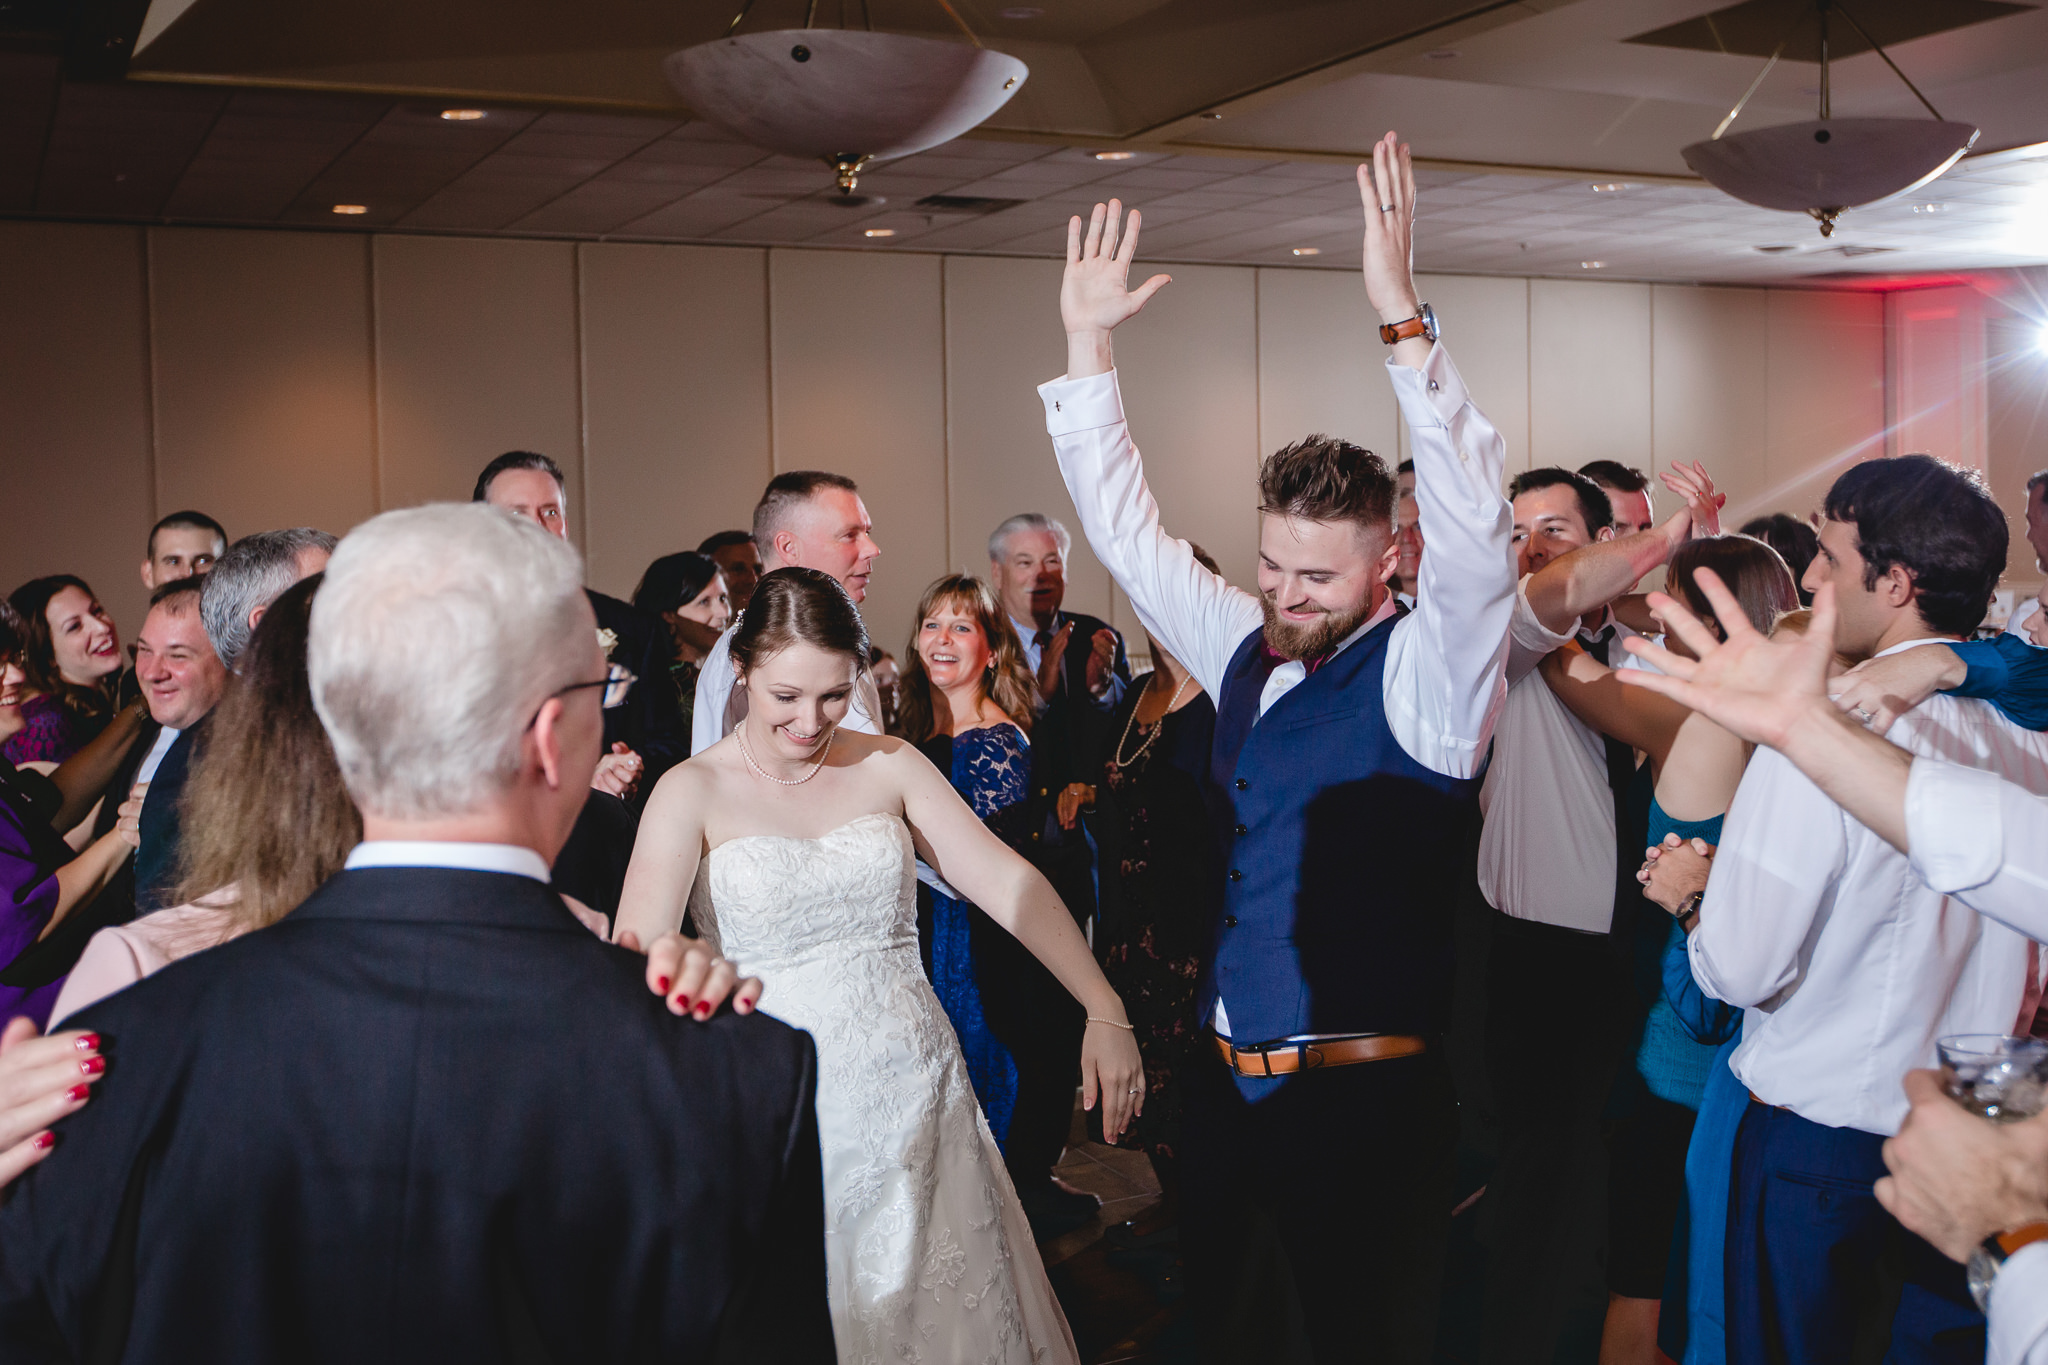 Bride and groom dance with guests at their Chadwick wedding reception